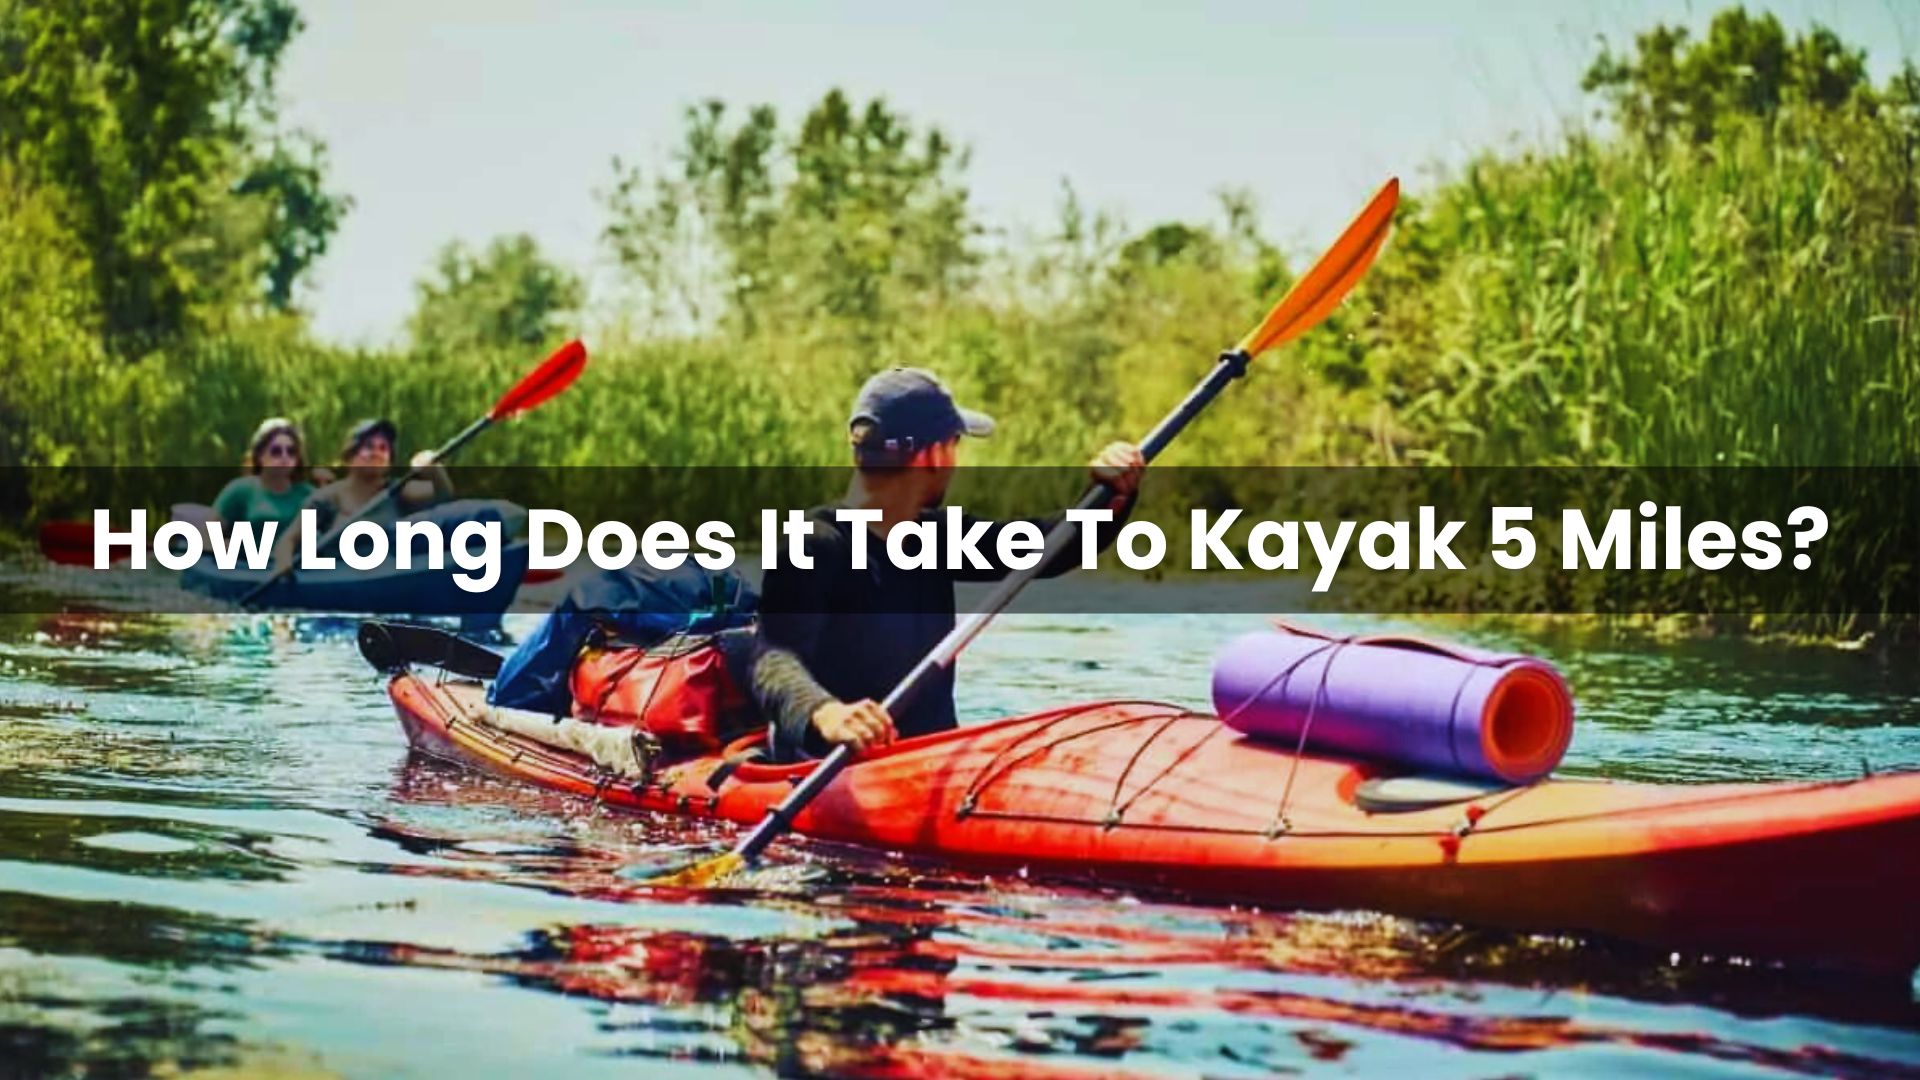 How Long Does It Take To Kayak 5 Miles